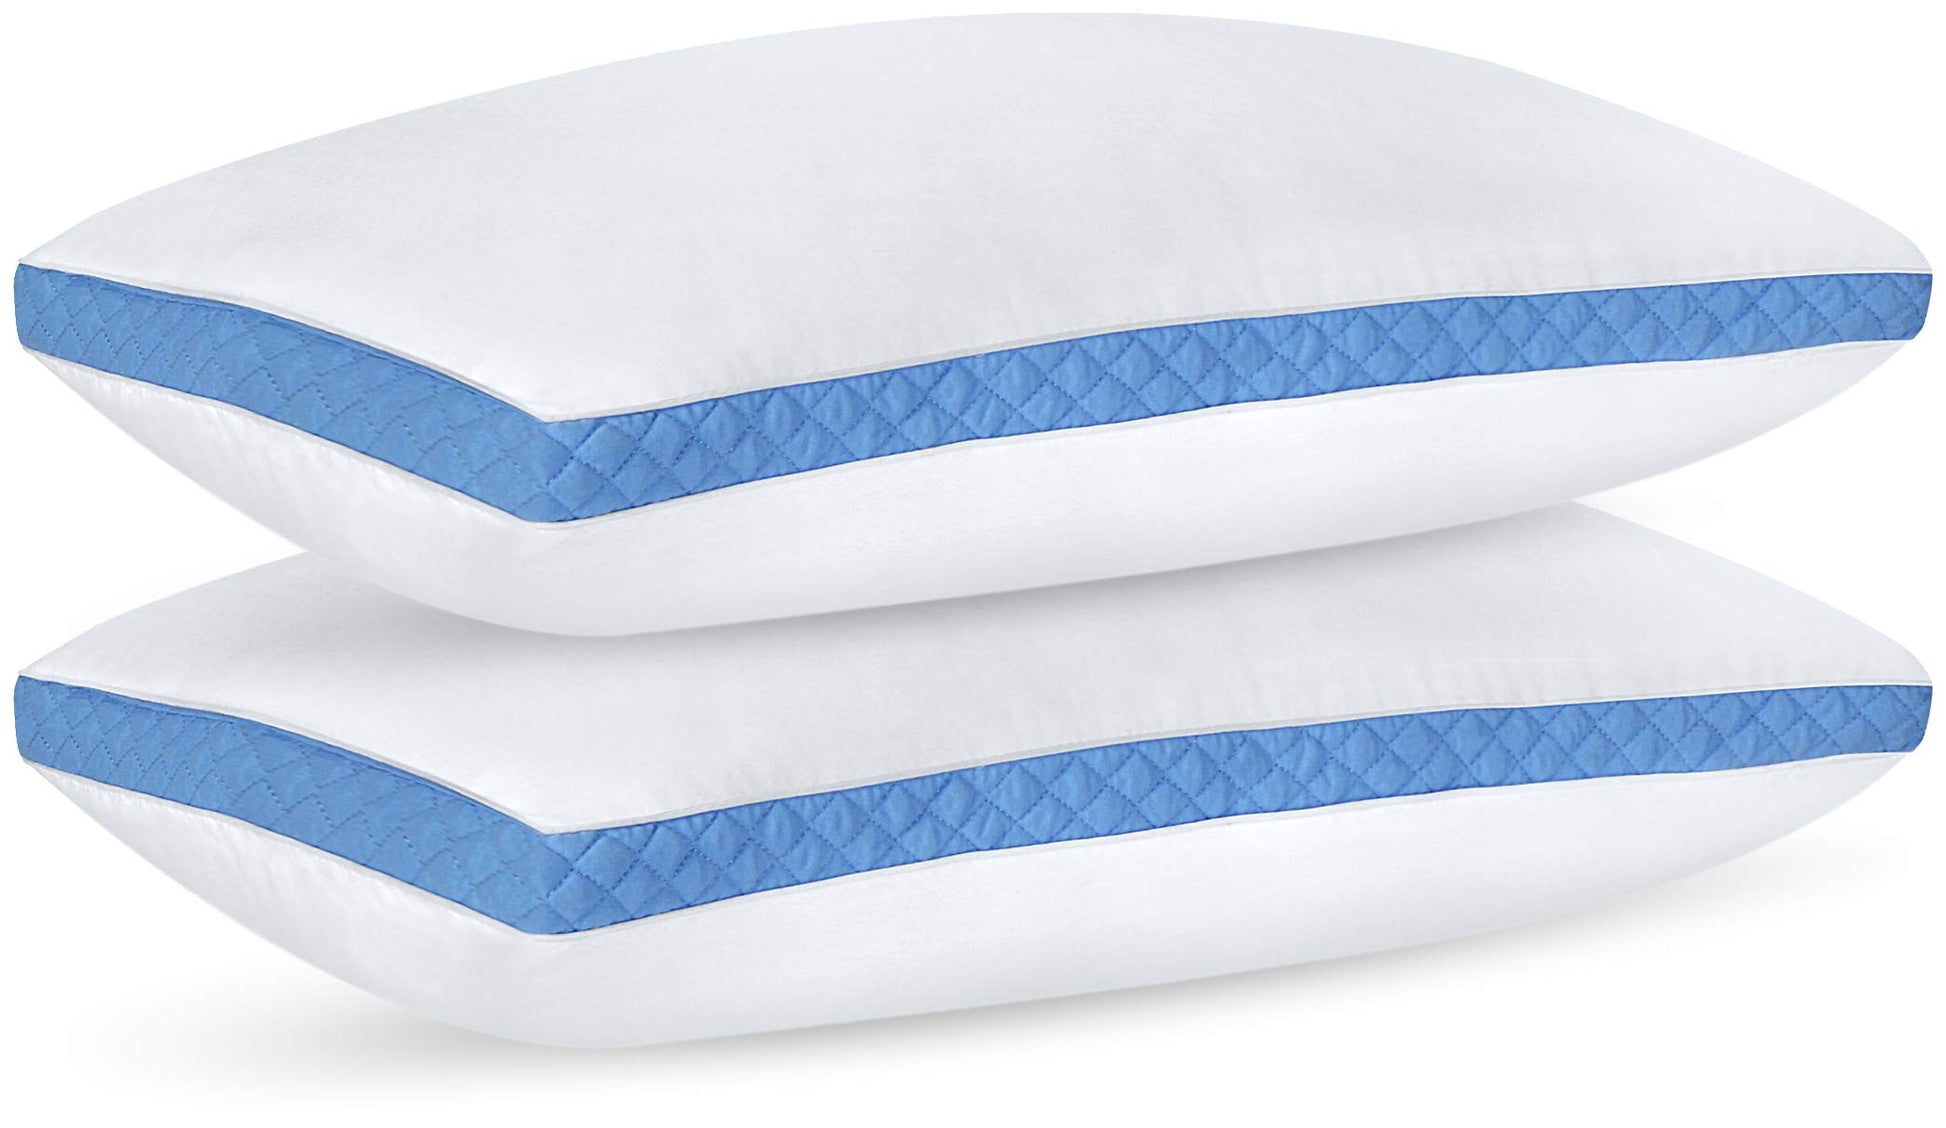 Utopia Bedding Queen Size Bed Pillows 2PK and 2PK Gusset Bed Pillow (White)